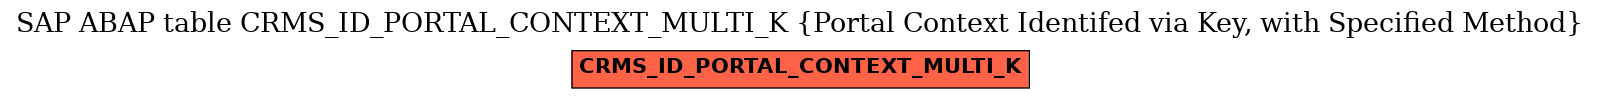 E-R Diagram for table CRMS_ID_PORTAL_CONTEXT_MULTI_K (Portal Context Identifed via Key, with Specified Method)